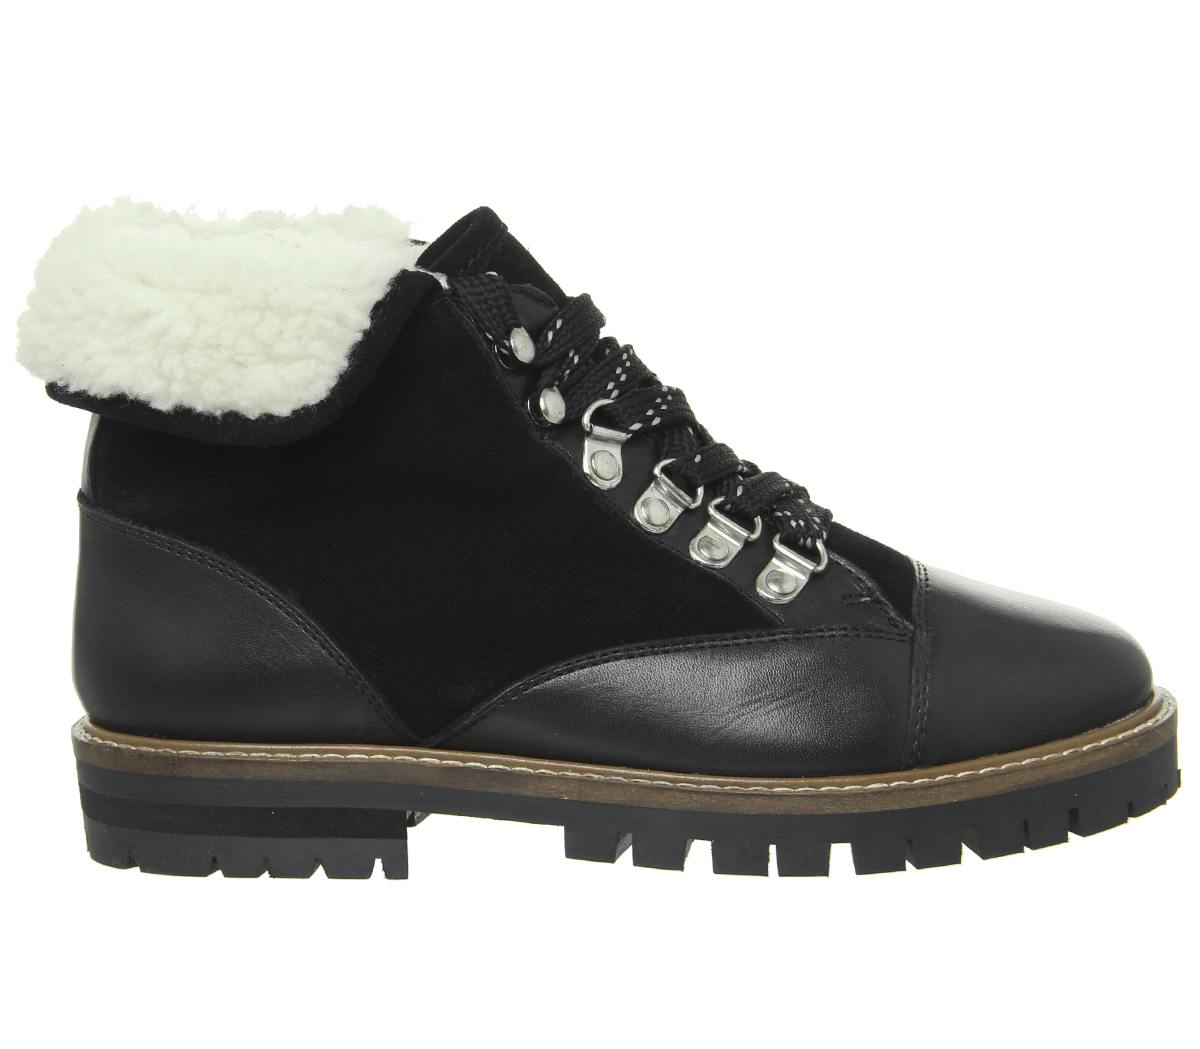 Why these alternative boots are a must-have for winter